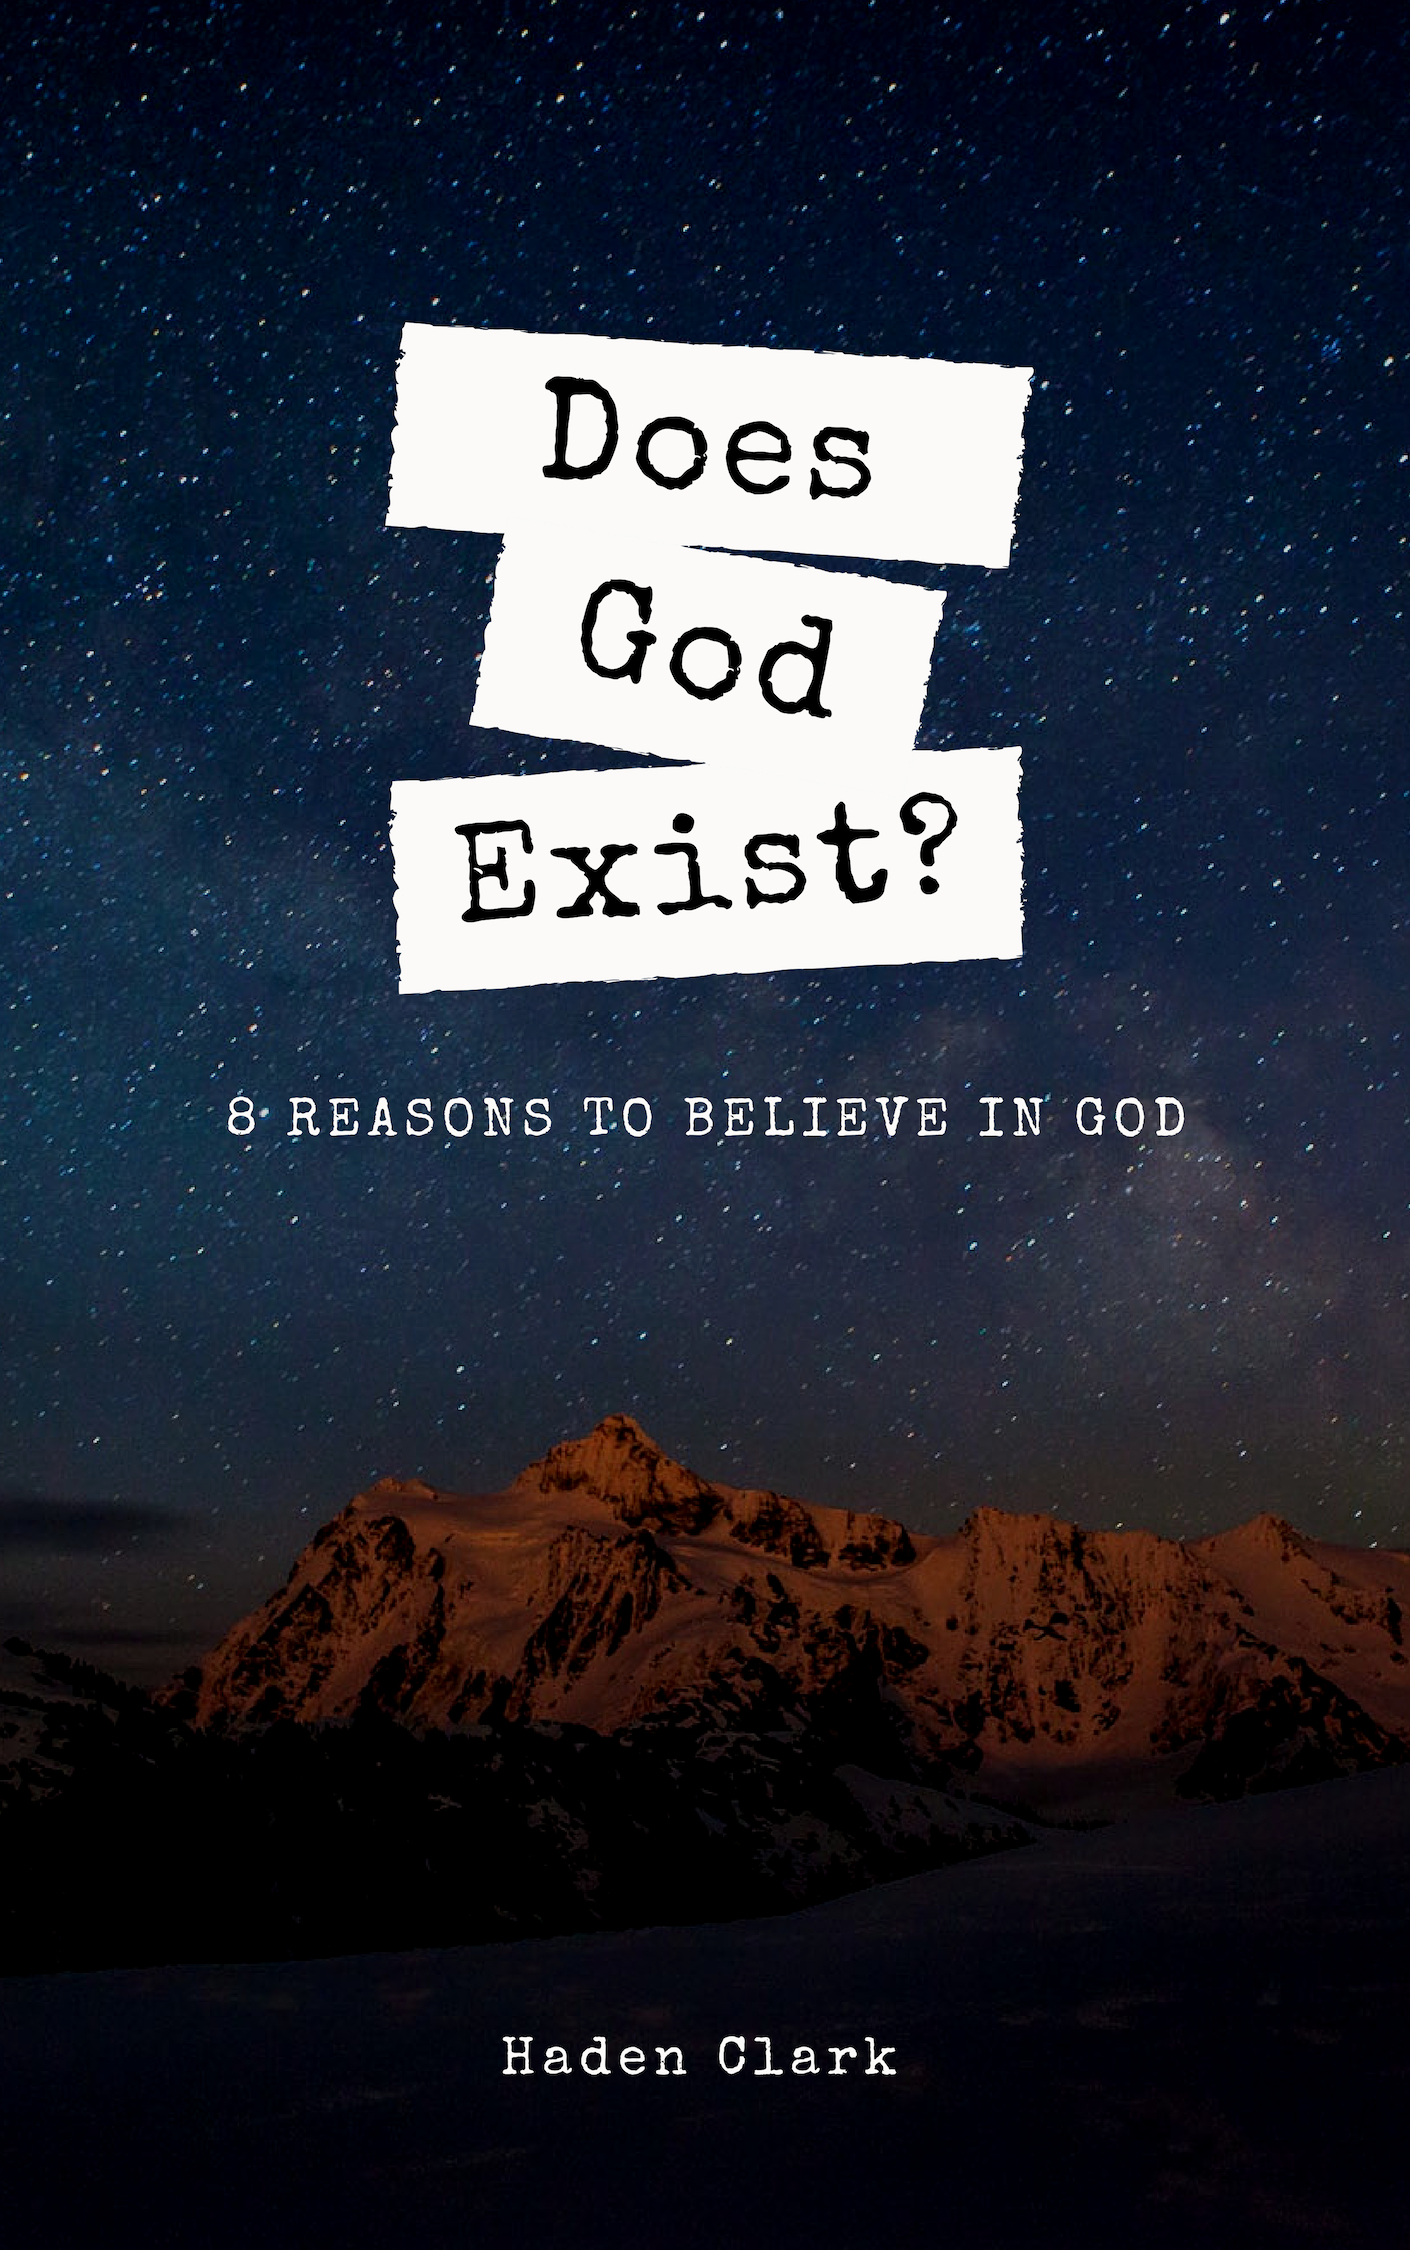 FREE: Does God Exist? 8 Reasons to Believe in God by Haden Clark